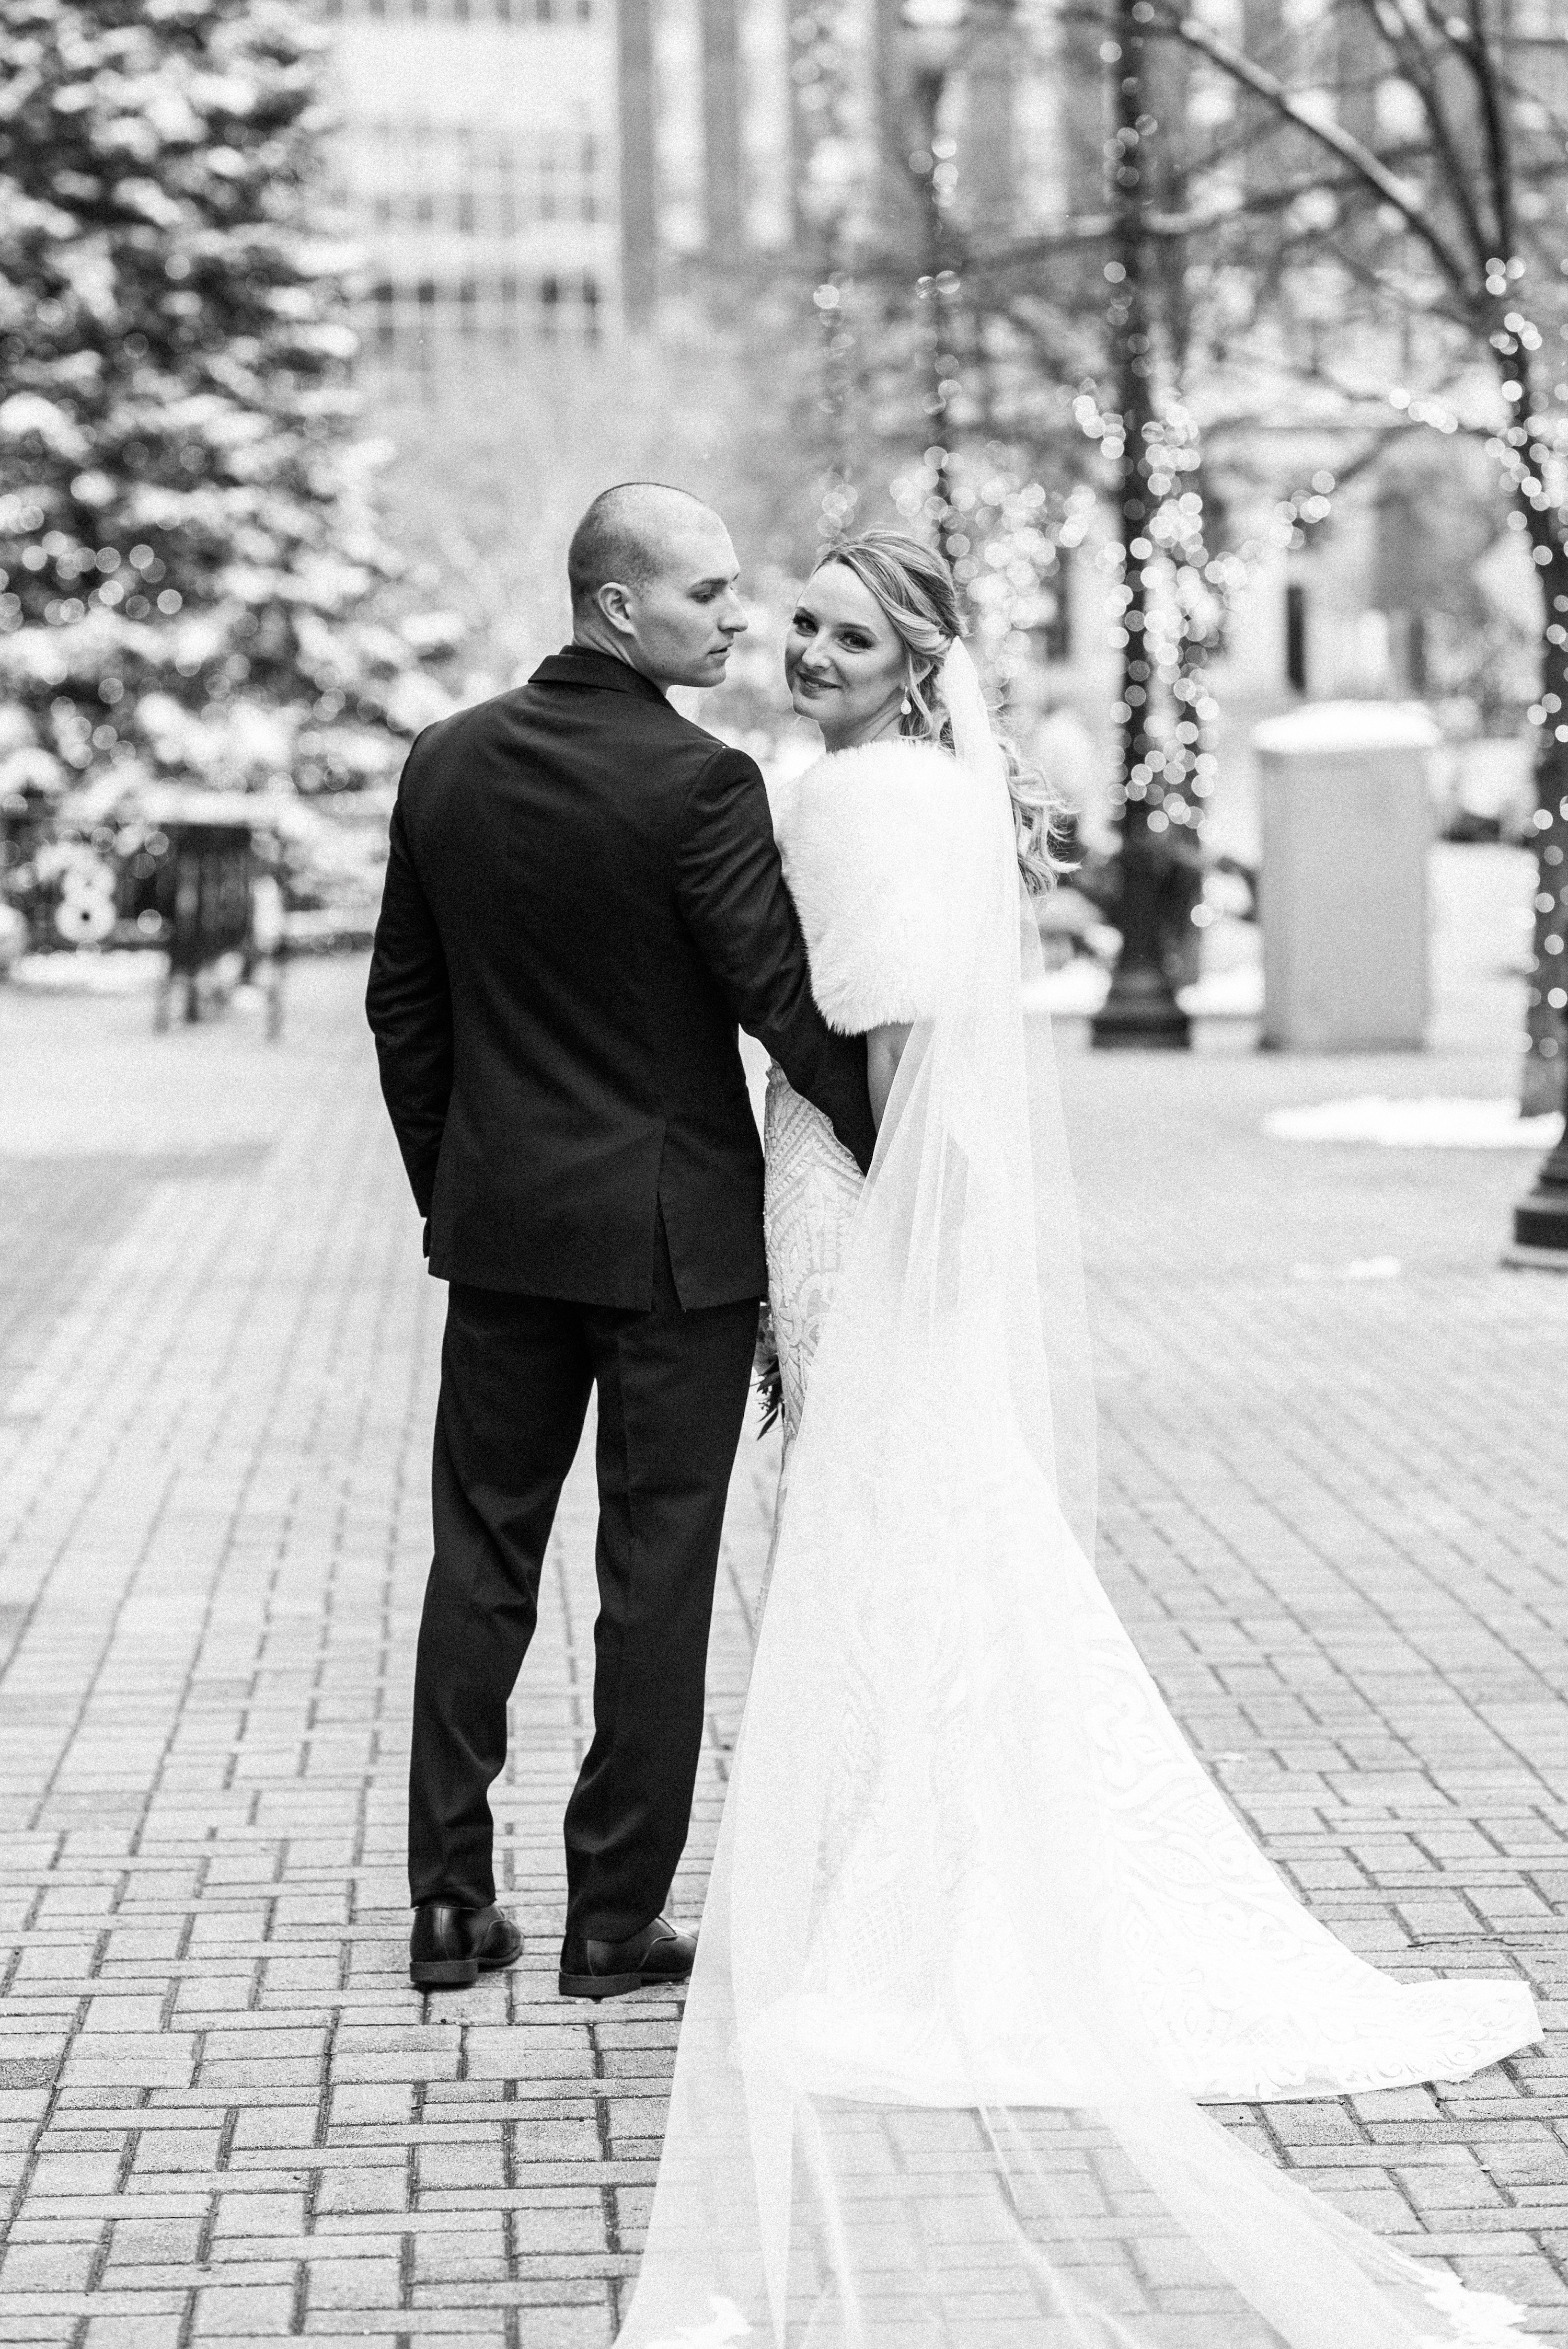 wedding day in downtown grand rapids, winter wedding photography, winter wedding, winter dowtown grand rapids michigan wedding, wedding day at cityflats hotel, cityflats hotel wedding day, winter wedding inspo, wedding inspiration